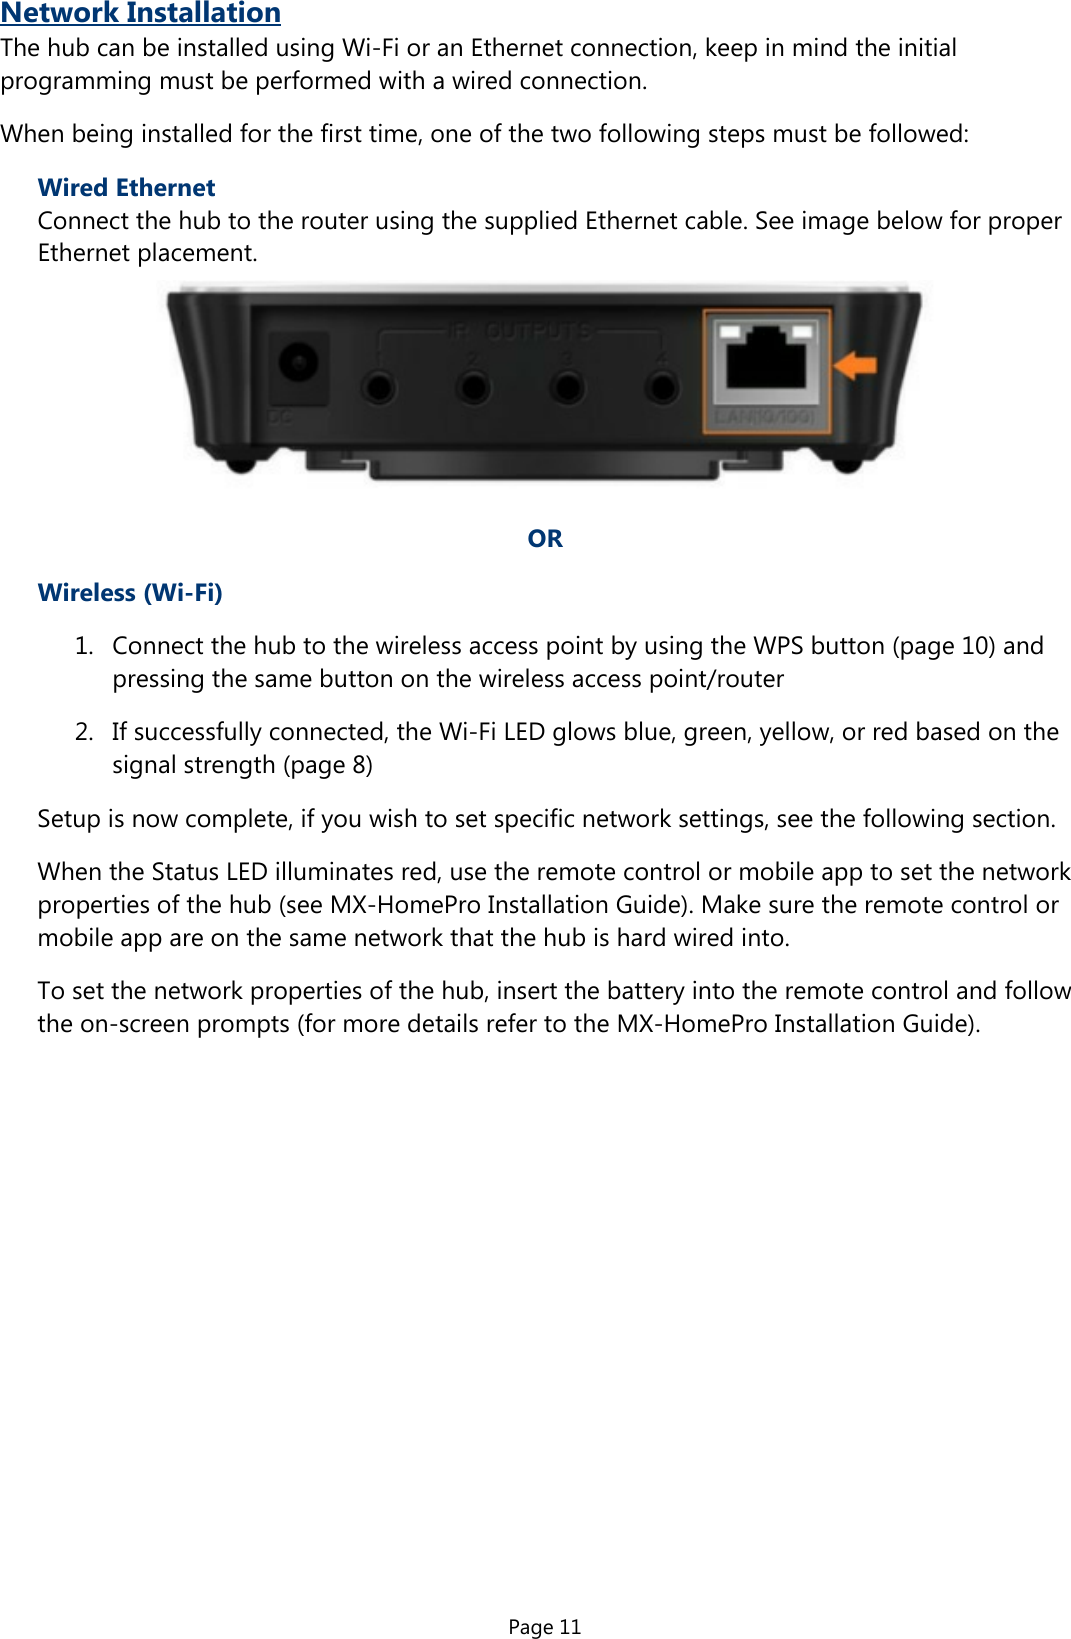 Page 11Network InstallationThe hub can be installed using Wi-Fi or an Ethernet connection, keep in mind the initialprogramming must be performed with a wired connection.When being installed for the first time, one of the two following steps must be followed:Wired EthernetConnect the hub to the router using the supplied Ethernet cable. See image below for proper  Ethernet placement.OR  Wireless (Wi-Fi)1.  Connect the hub to the wireless access point by using the WPS button (page 10) andpressing the same button on the wireless access point/router2.  If successfully connected, the Wi-Fi LED glows blue, green, yellow, or red based on thesignal strength (page 8)Setup is now complete, if you wish to set specific network settings, see the following section.When the Status LED illuminates red, use the remote control or mobile app to set the networkproperties of the hub (see MX-HomePro Installation Guide). Make sure the remote control ormobile app are on the same network that the hub is hard wired into.To set the network properties of the hub, insert the battery into the remote control and followthe on-screen prompts (for more details refer to the MX-HomePro Installation Guide).